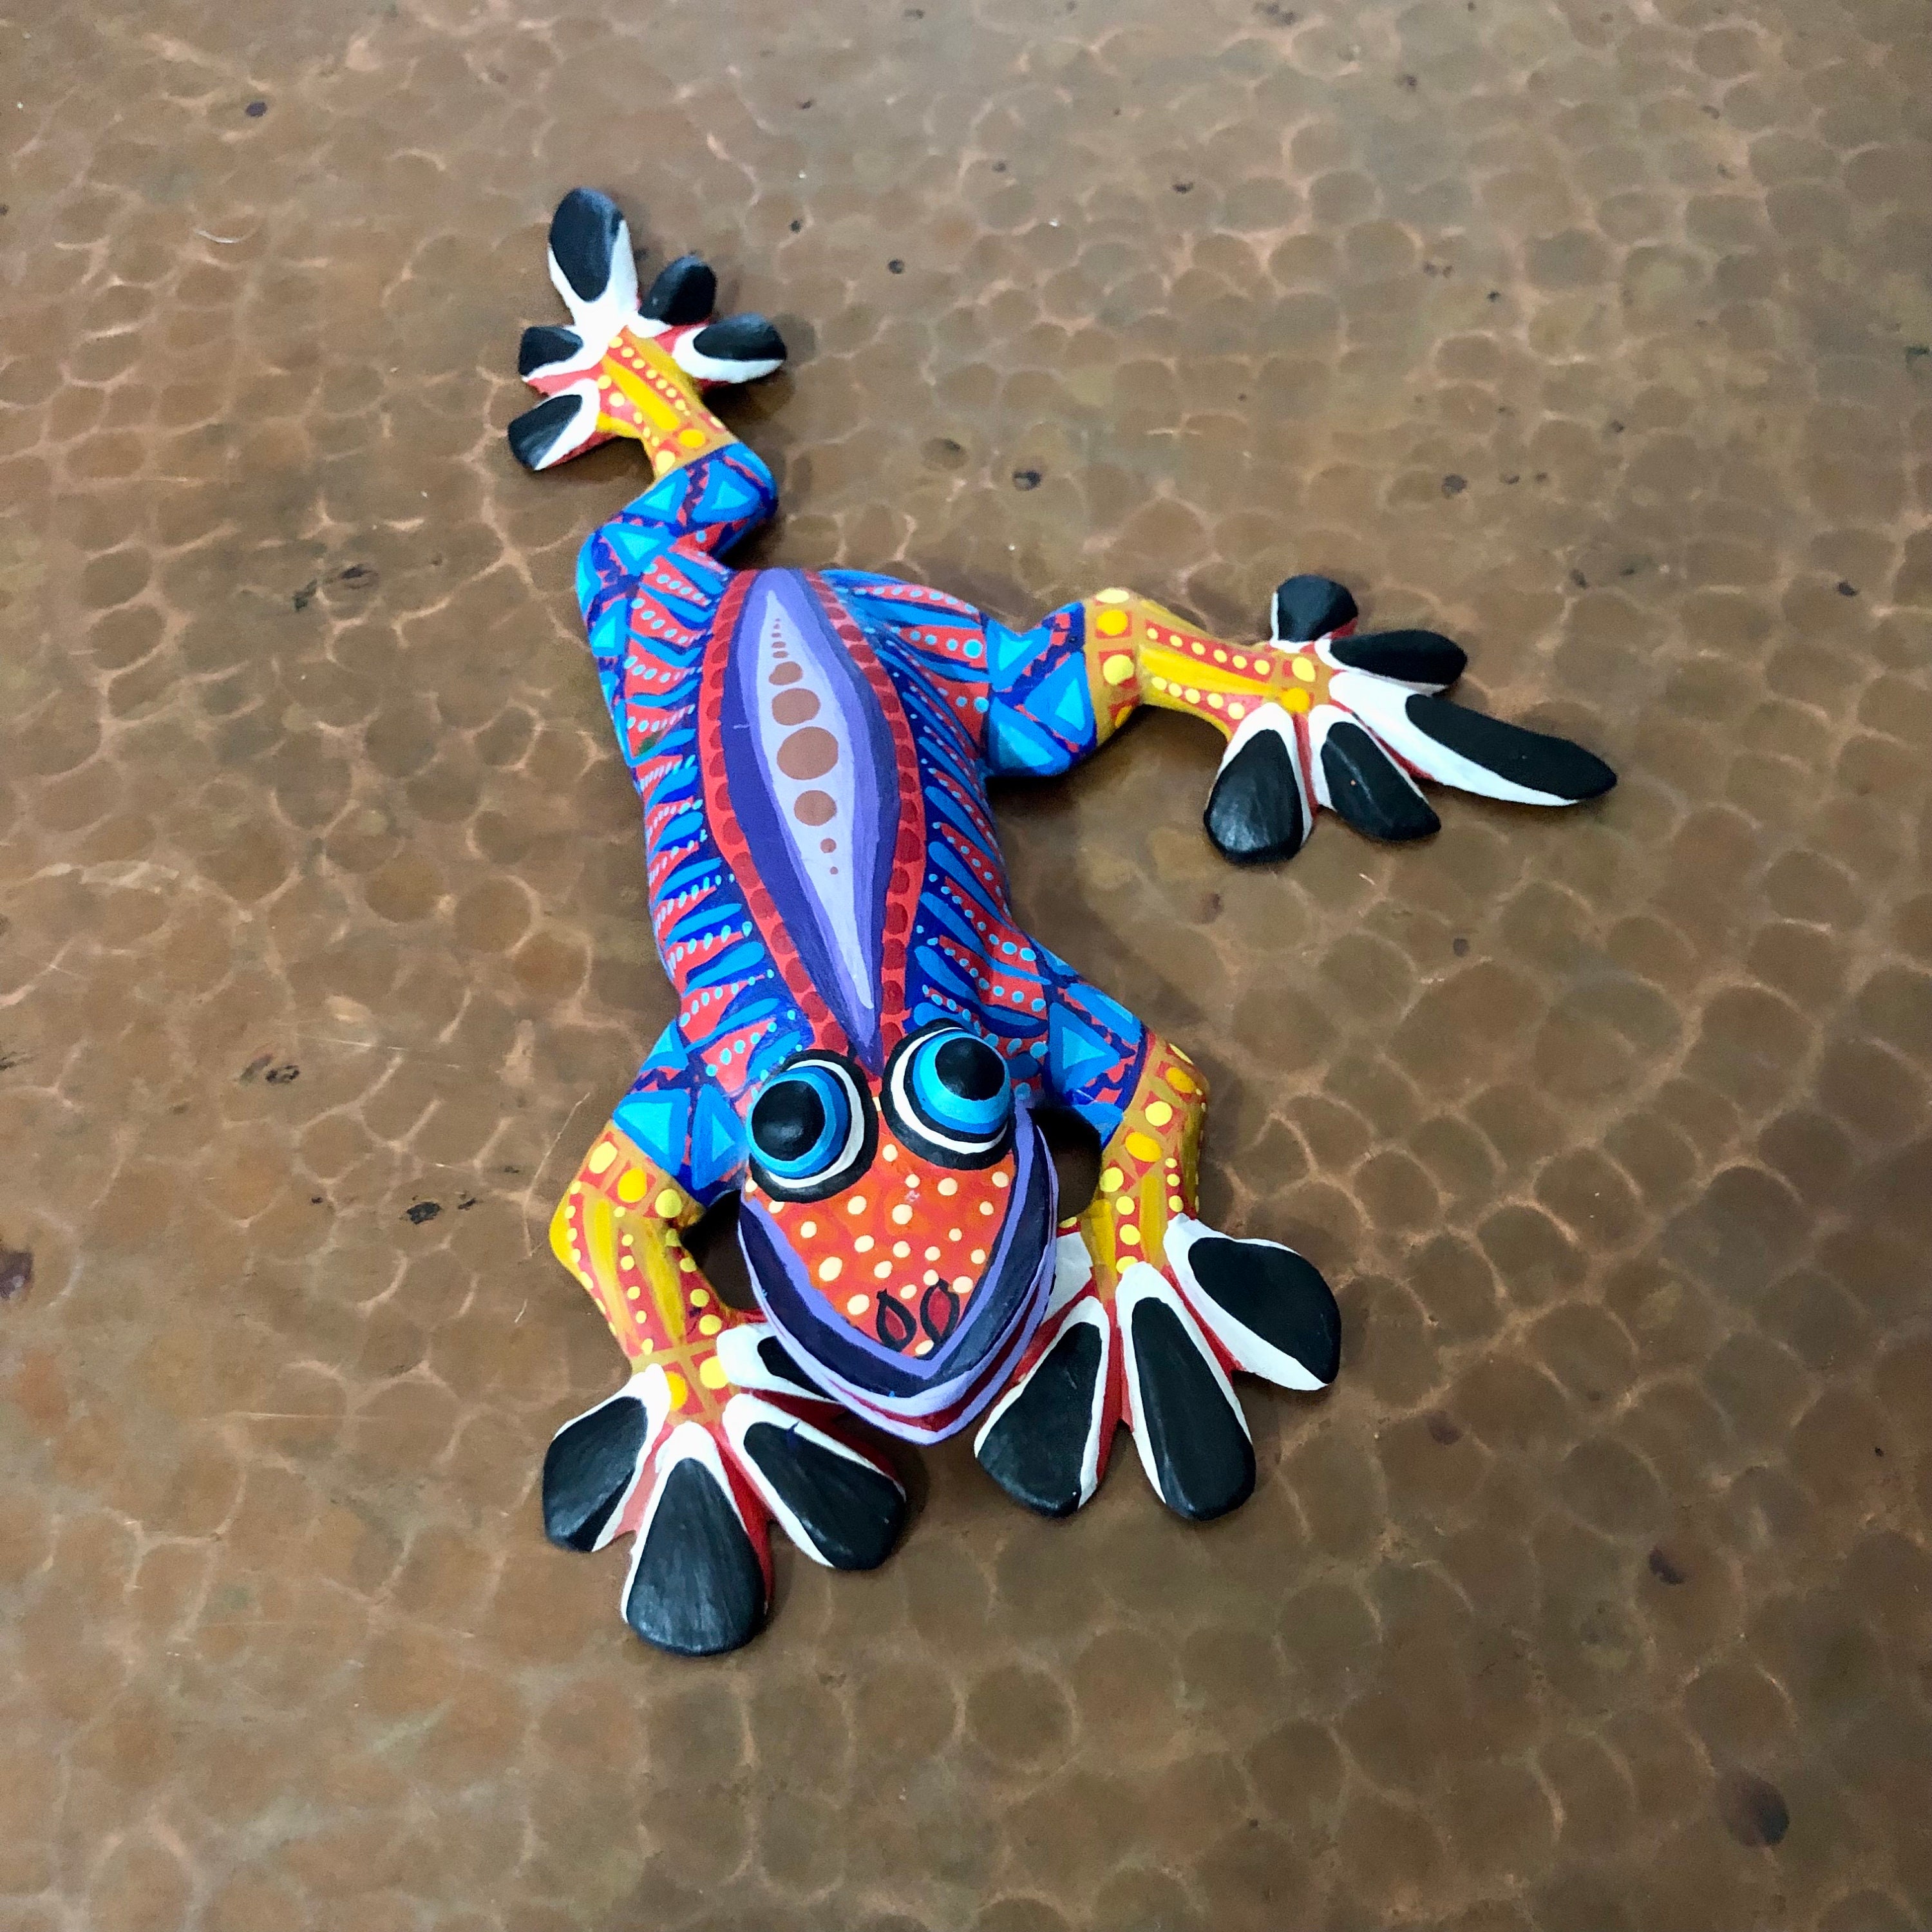 Wooden Seahorse Pendent Mexican Alebrije Charms Jewelry Handcrafted Crafts  Artisan Handcrafted Carved Animal Fiesta Folk Art Best Seller